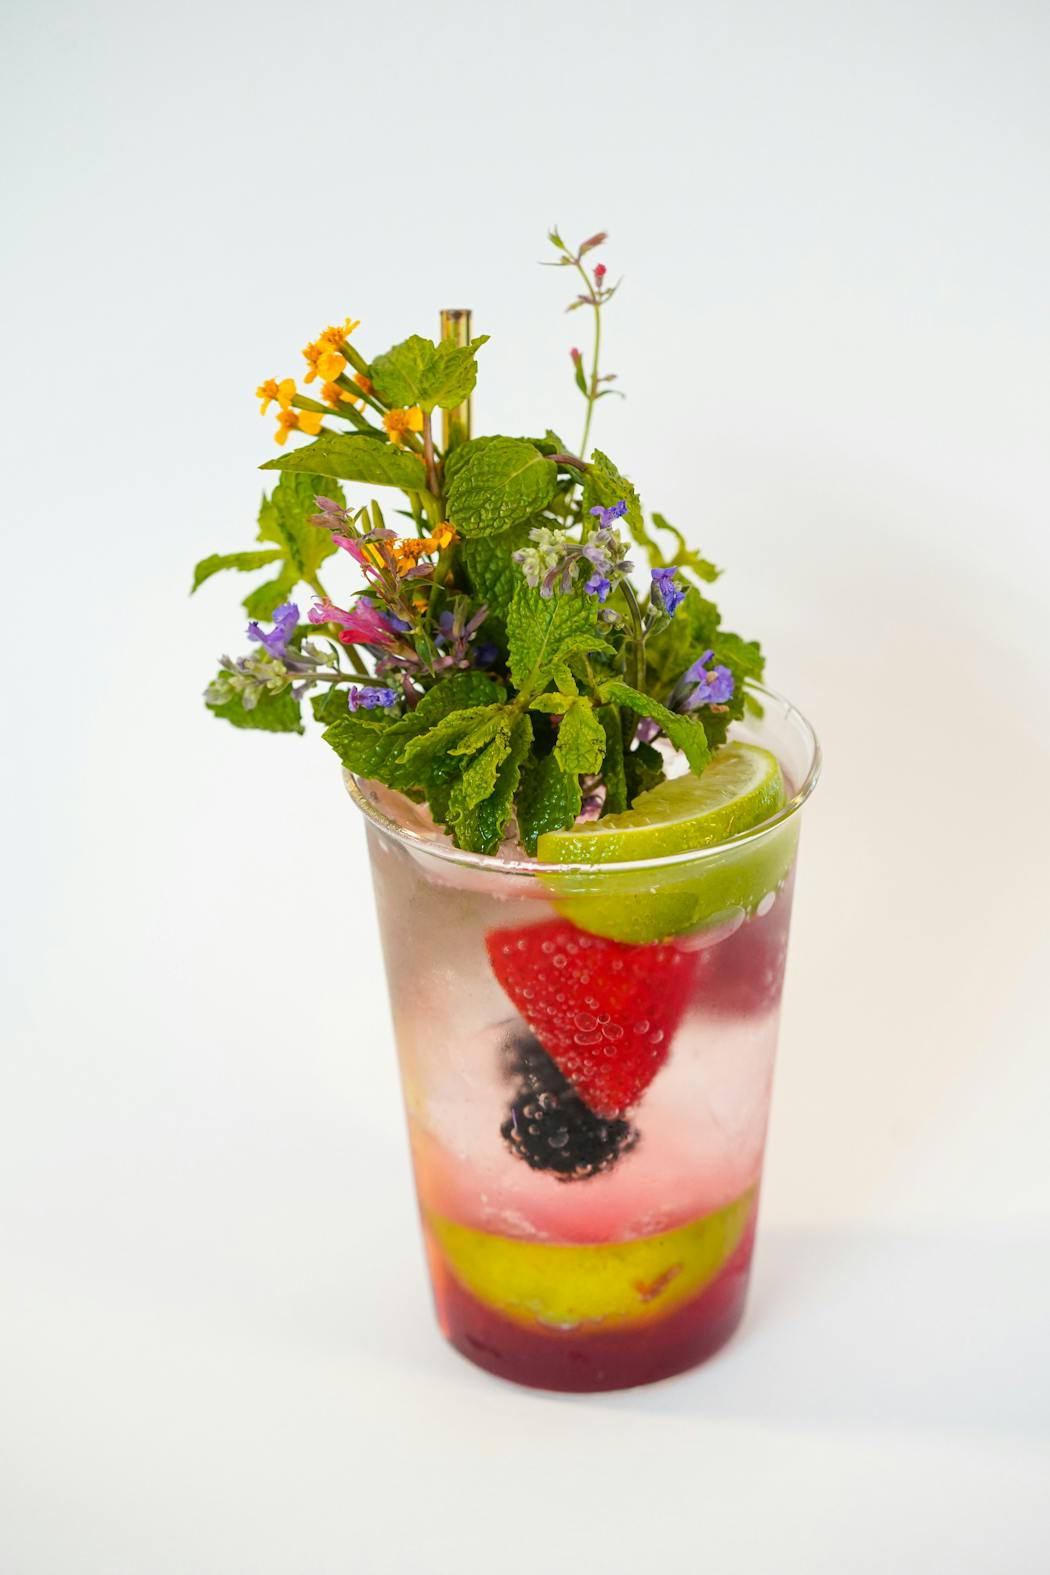 At Cardamom, the carbonated Gazoz combines fermented berries, cardamom, pomegranate, herbs and flowers.